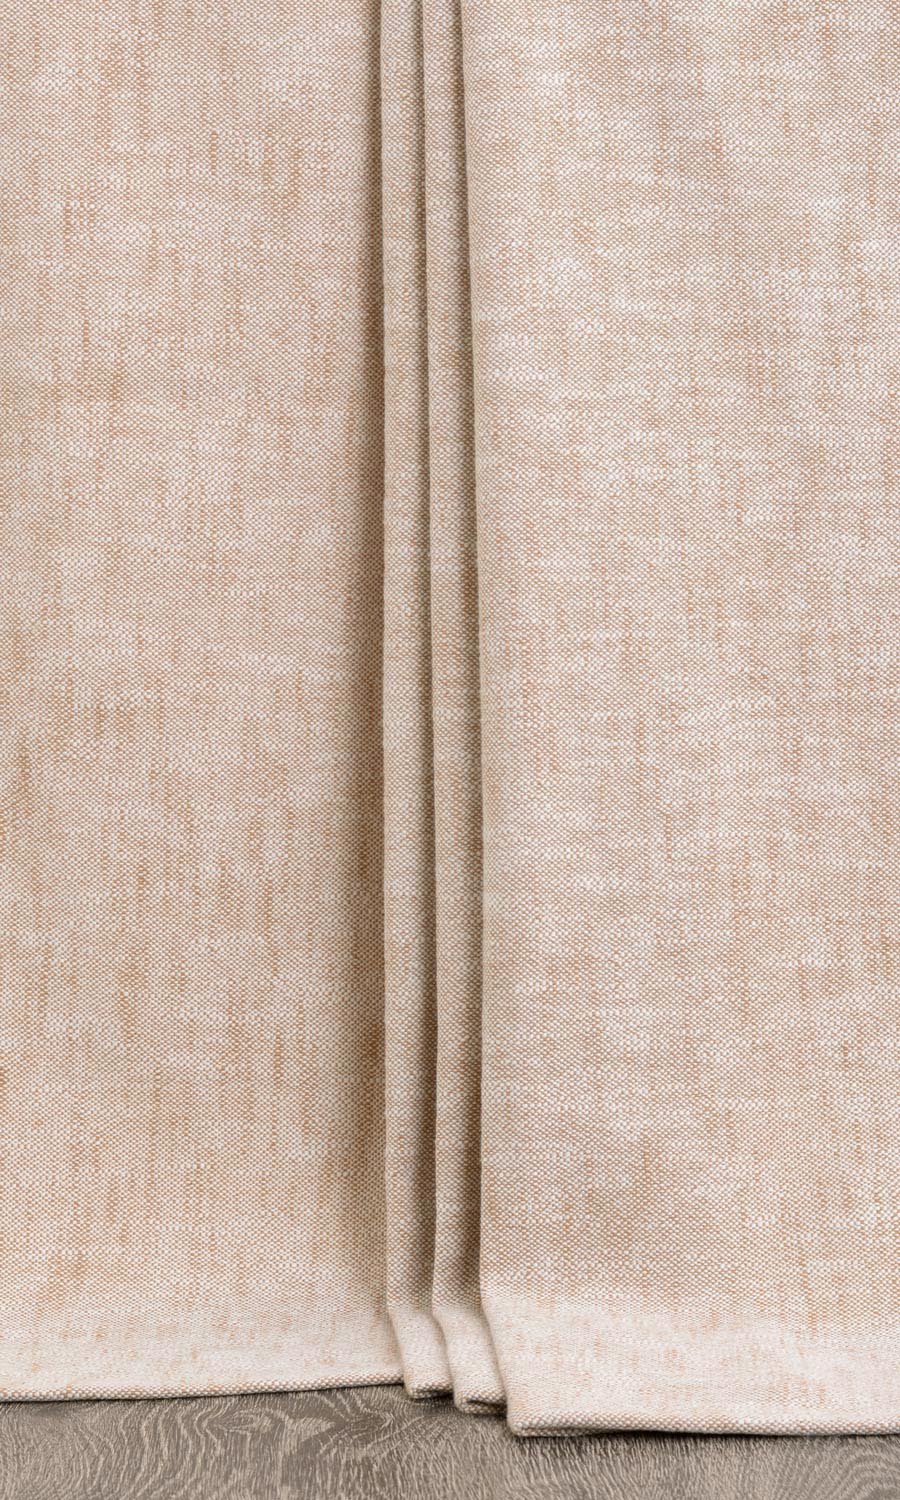 'Lino' Made to Measure Curtains (Natural Oatmeal Beige)